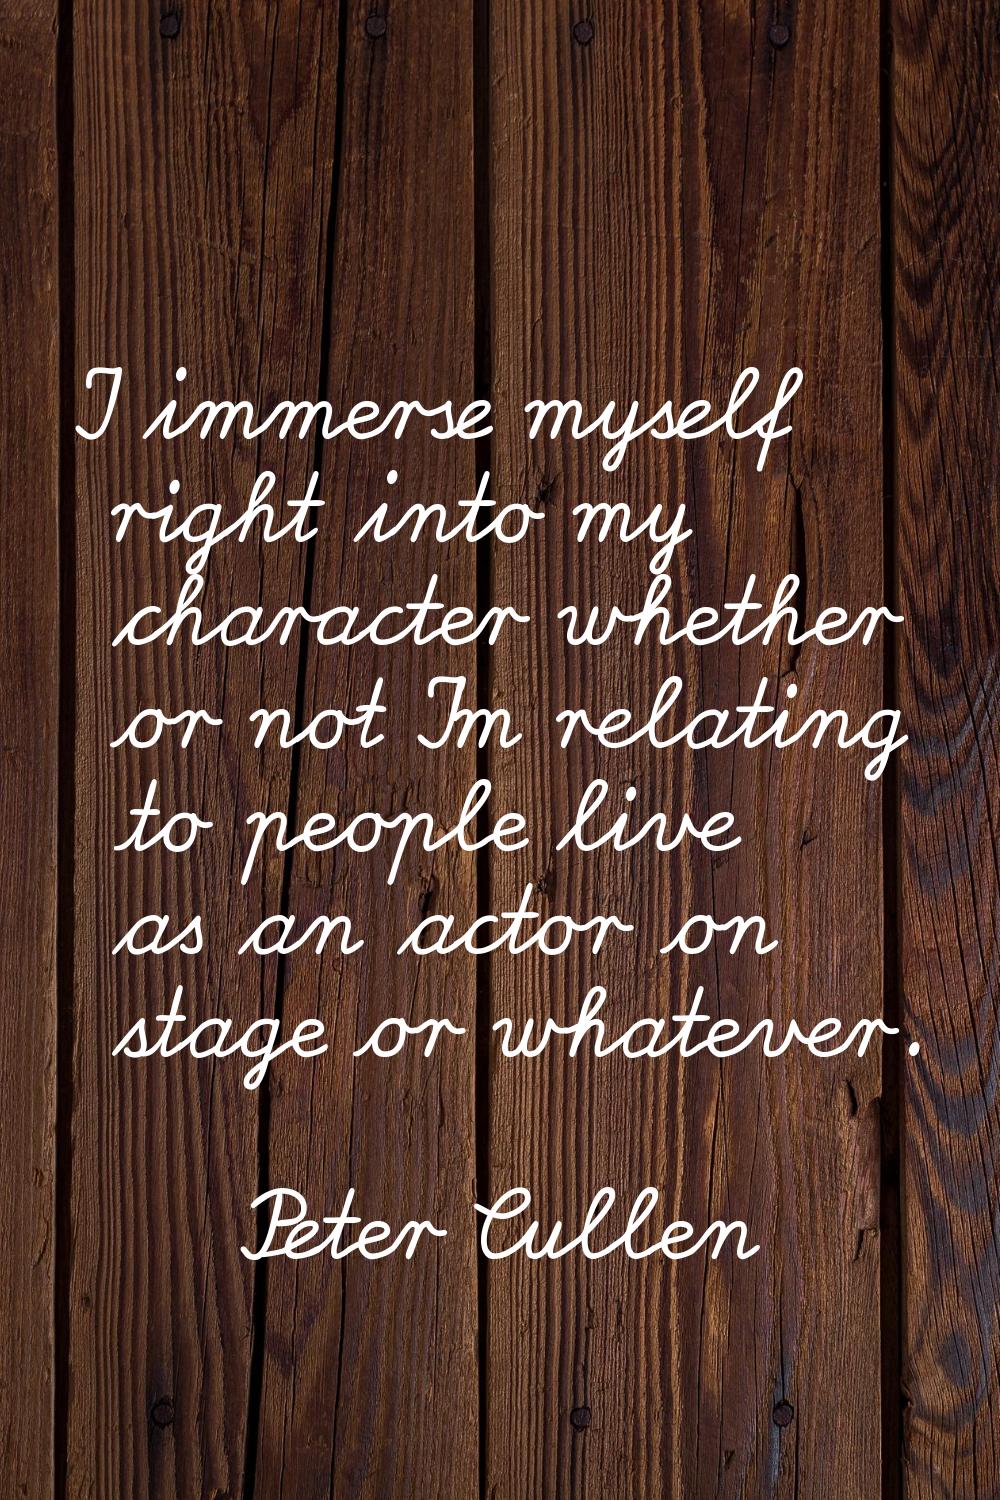 I immerse myself right into my character whether or not I'm relating to people live as an actor on 